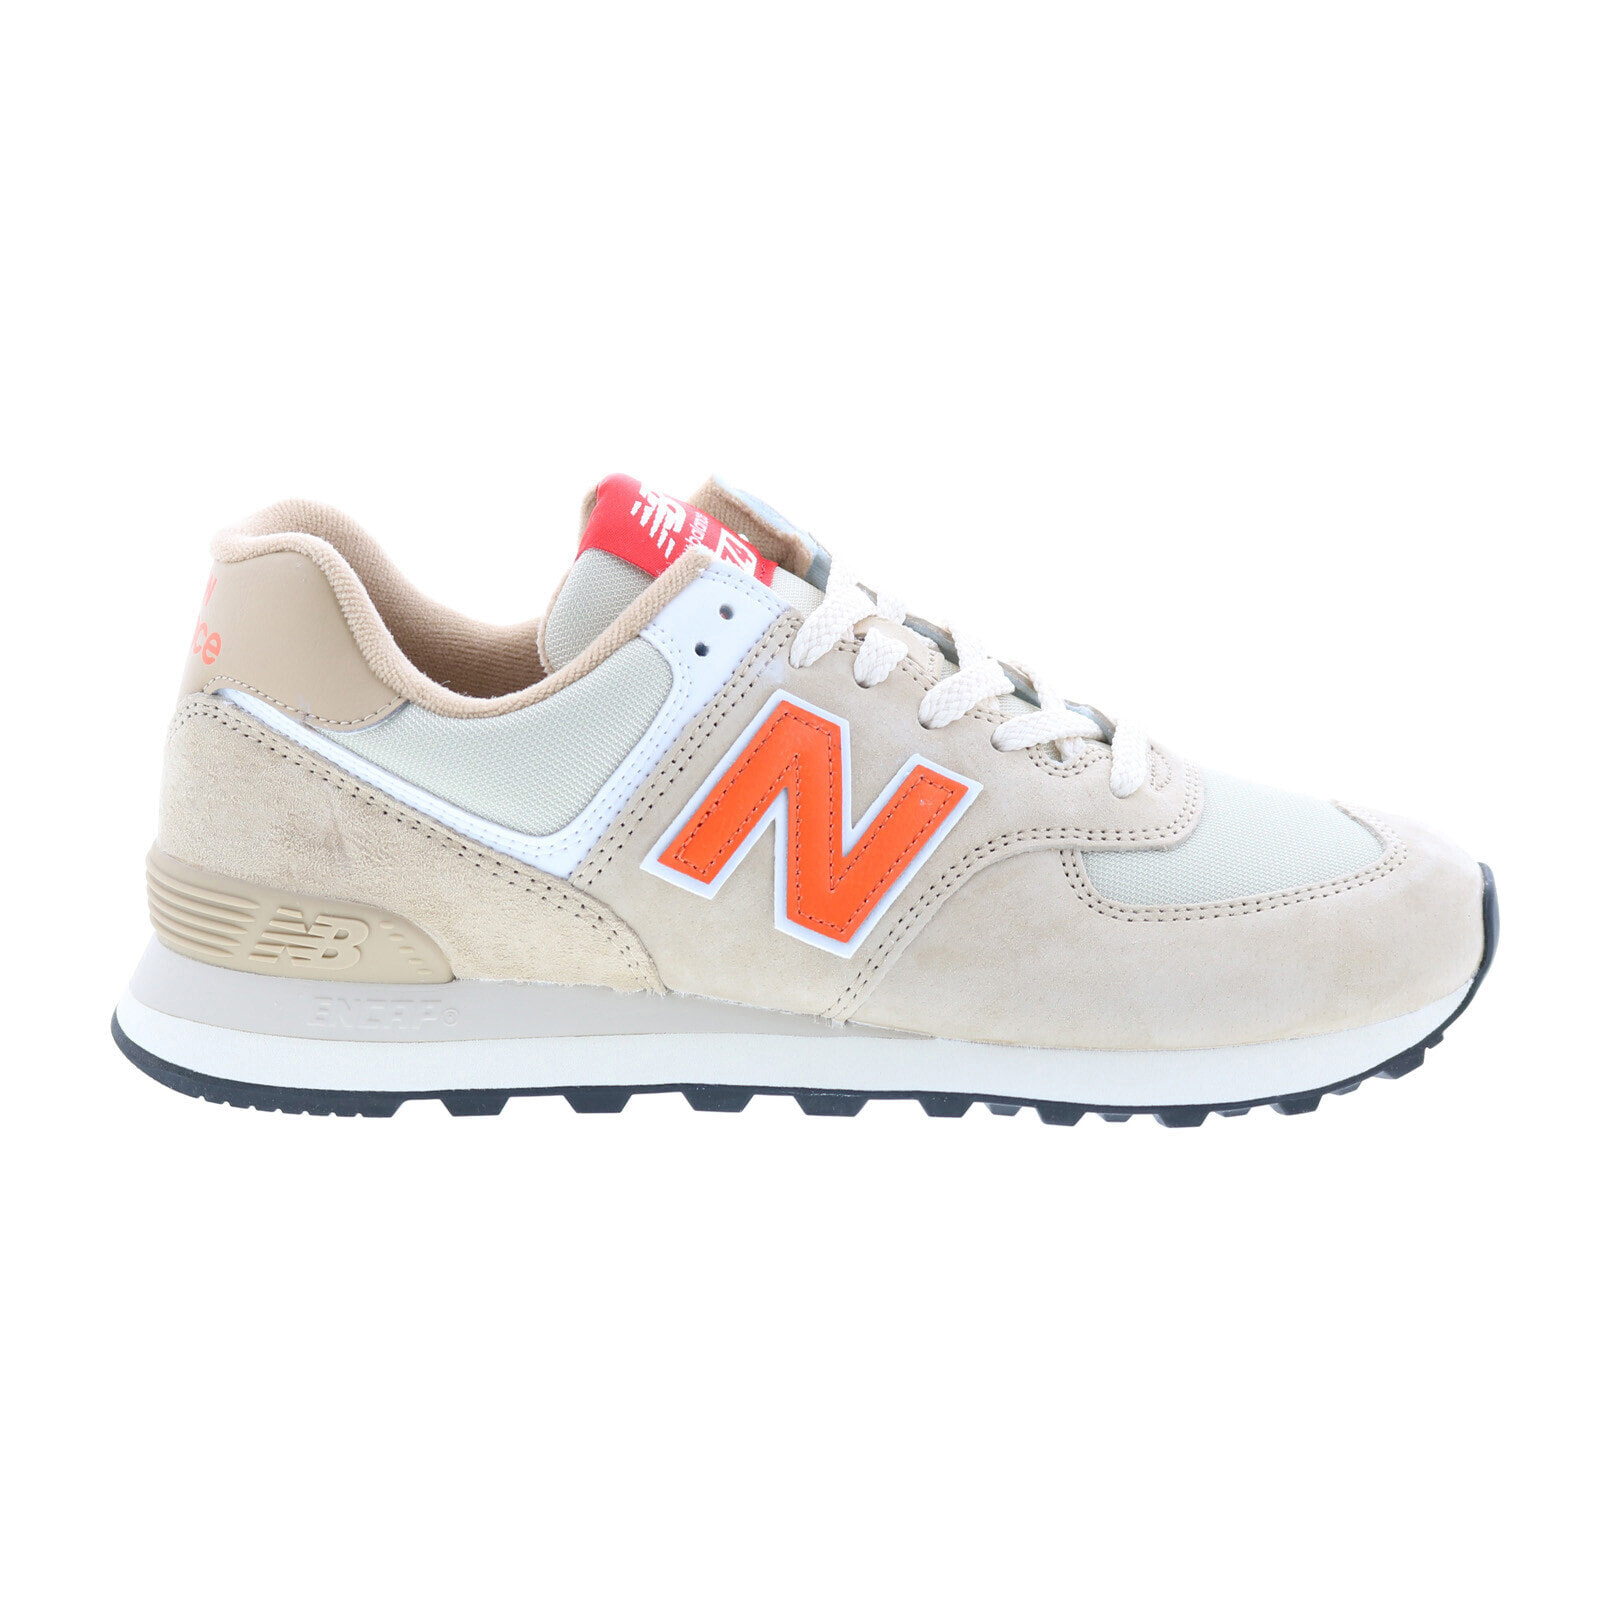 New Balance 574 U574HBO Mens Beige Suede Lace Up Lifestyle Sneakers Shoes